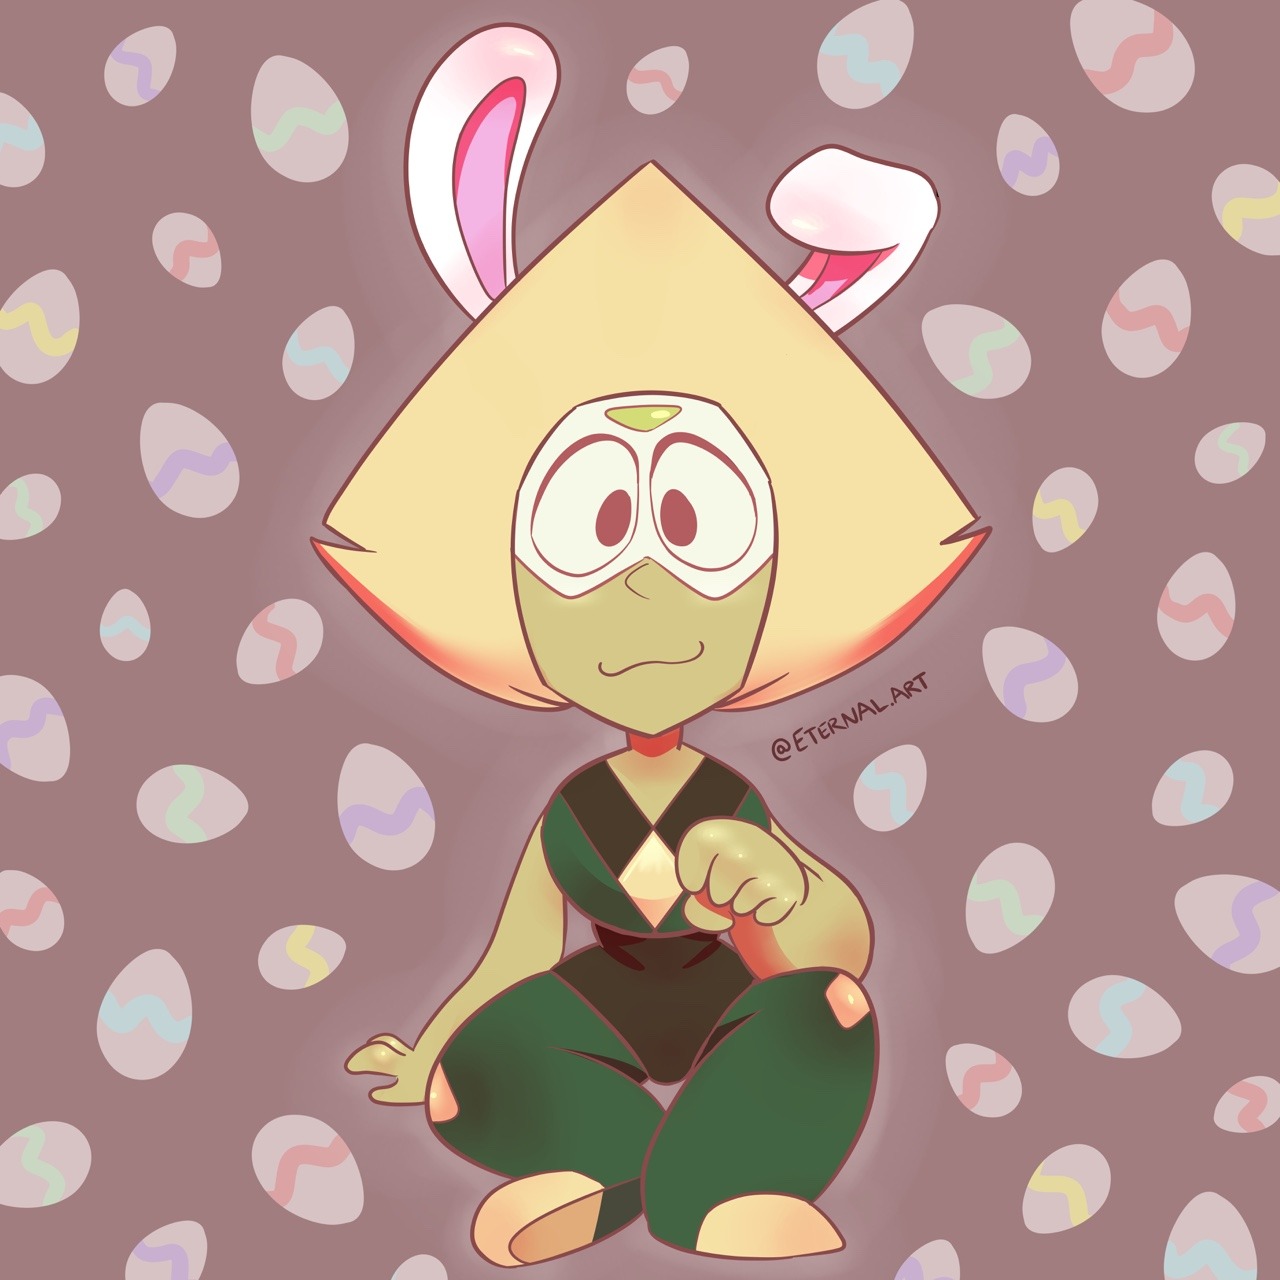 Happy Easter everyone! You have been blessed by the Easter Peridot 🐇 (eternal.art > my instagram)